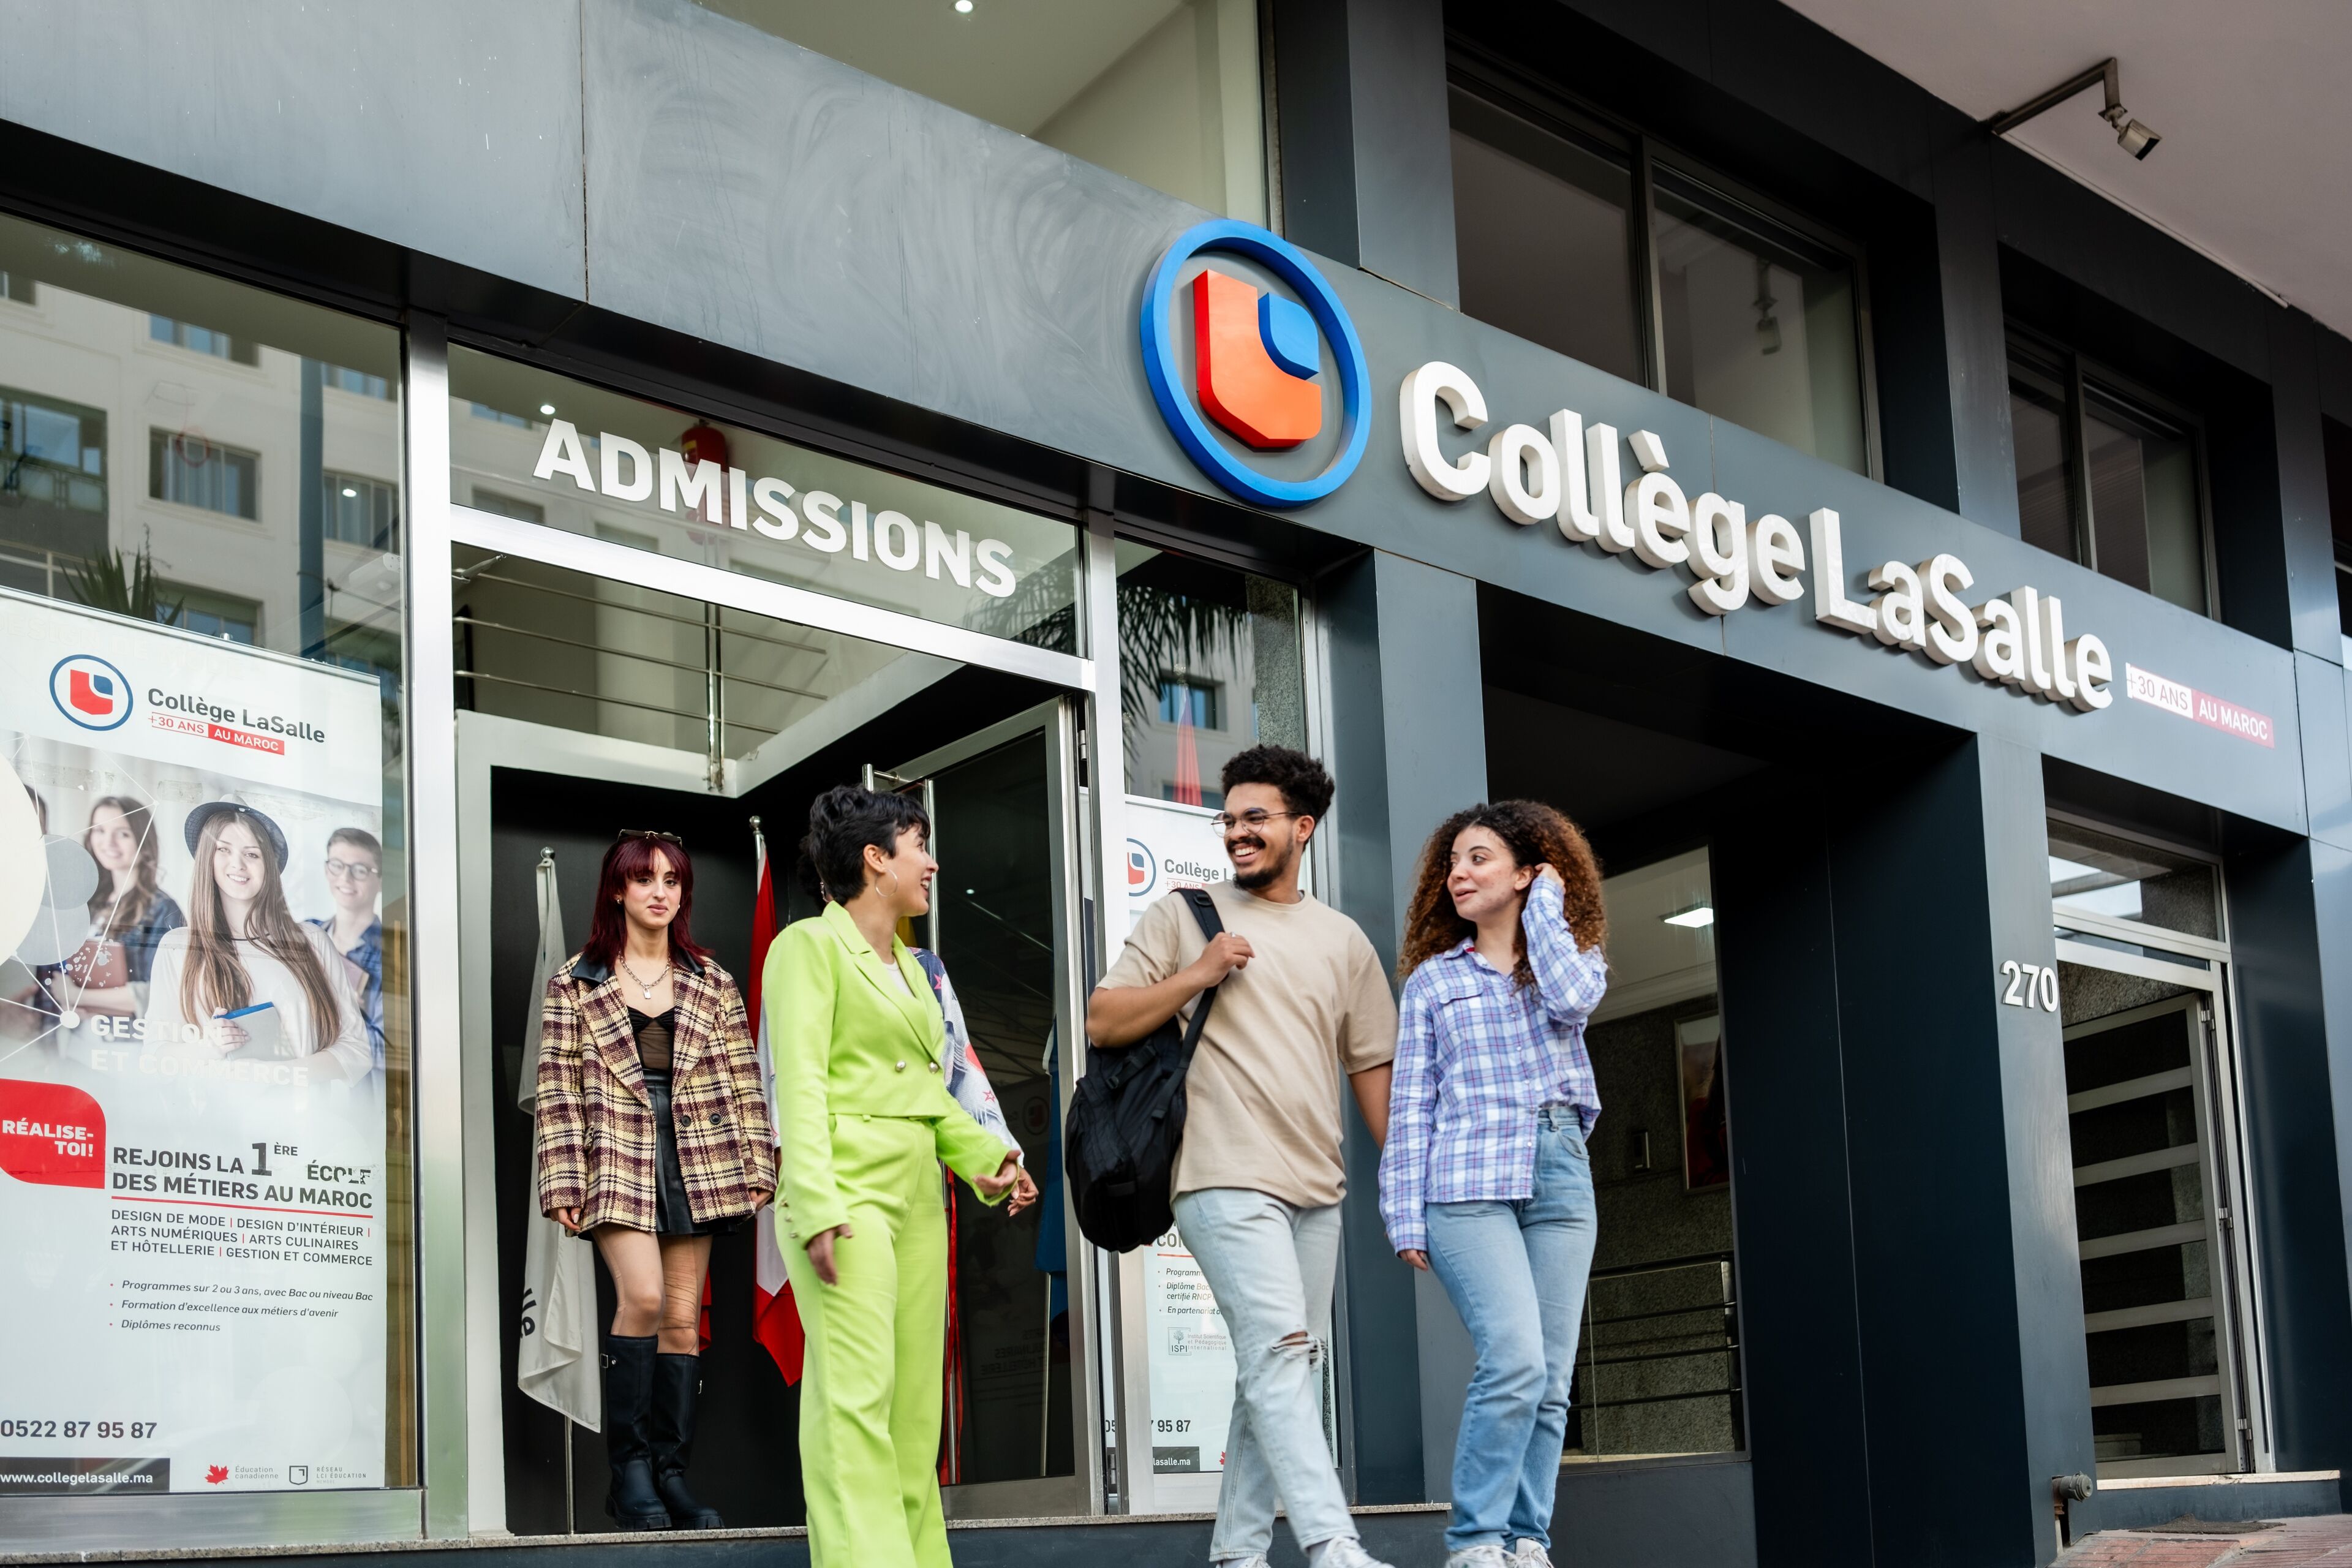 Four diverse students engaging in conversation outside the admissions entrance of Collège LaSalle.